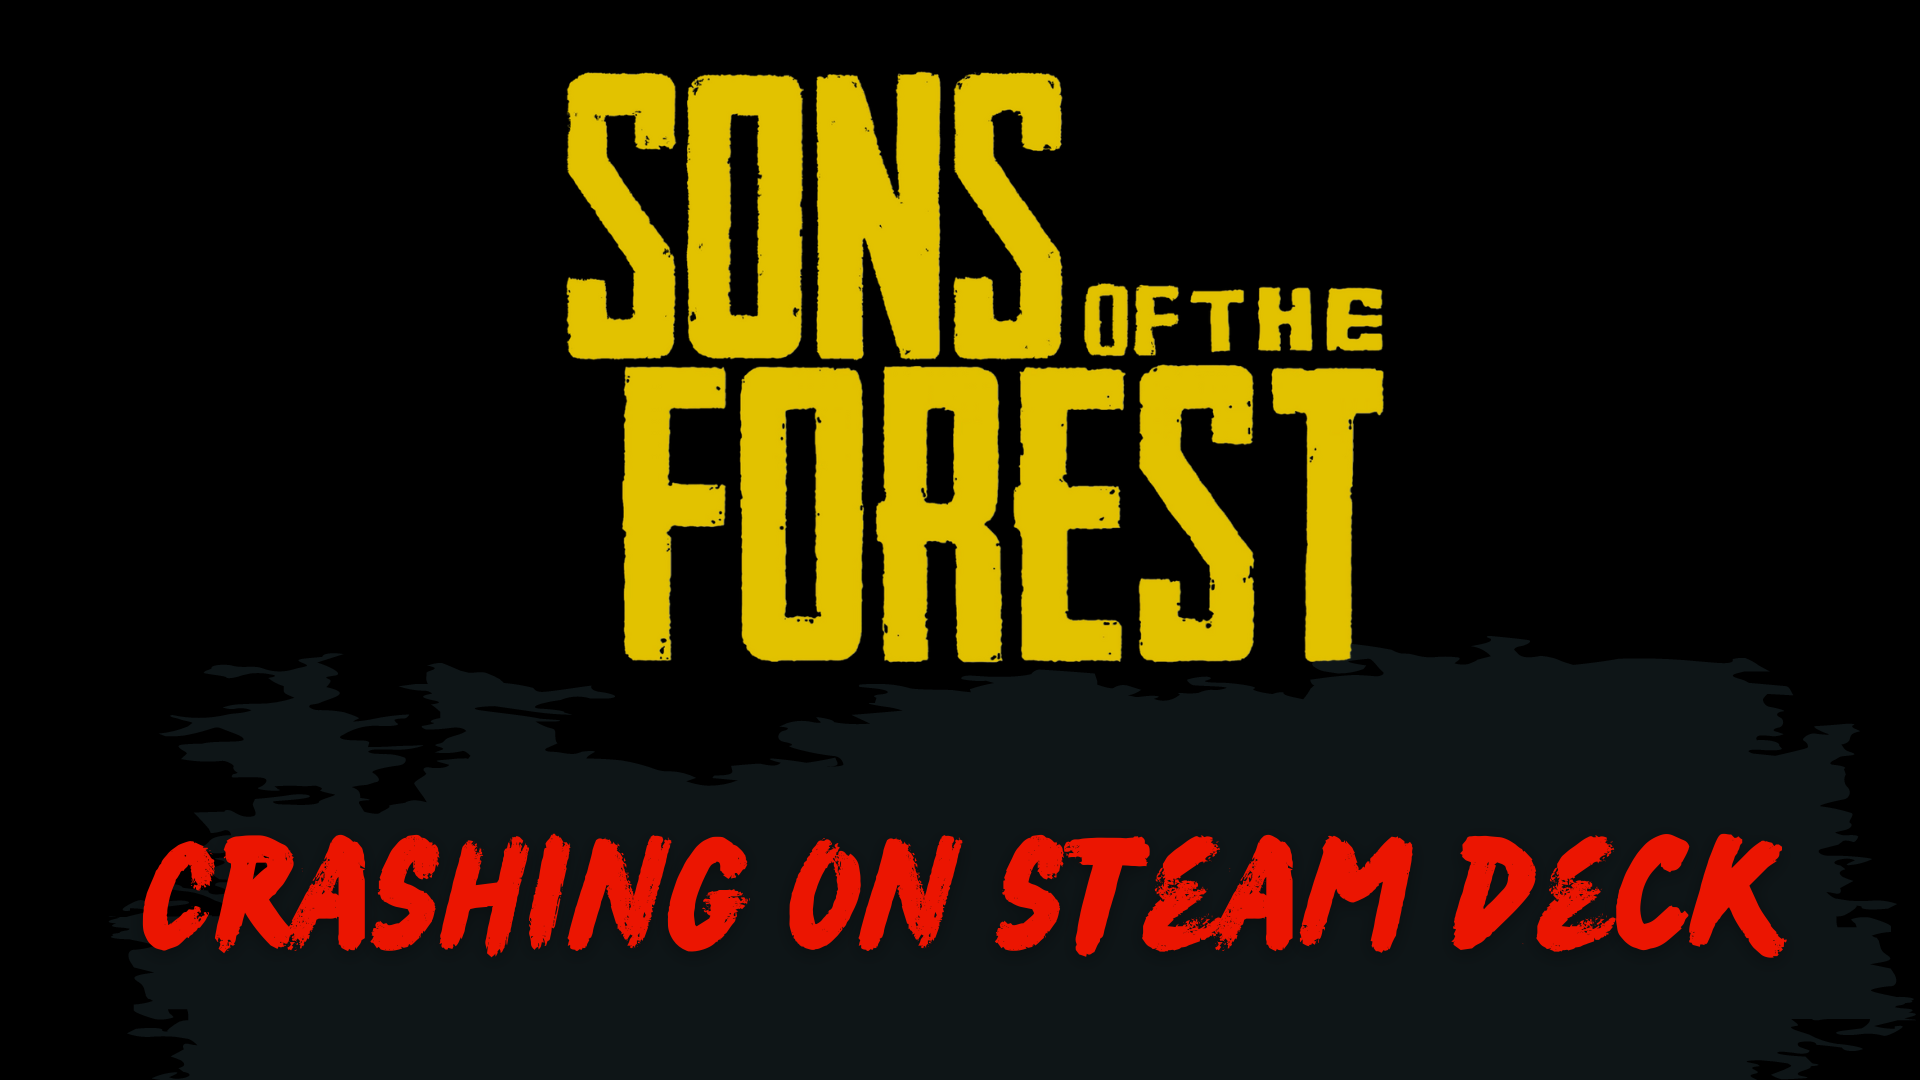 Is Sons of the Forest Steam Deck Performance Good? - Answered